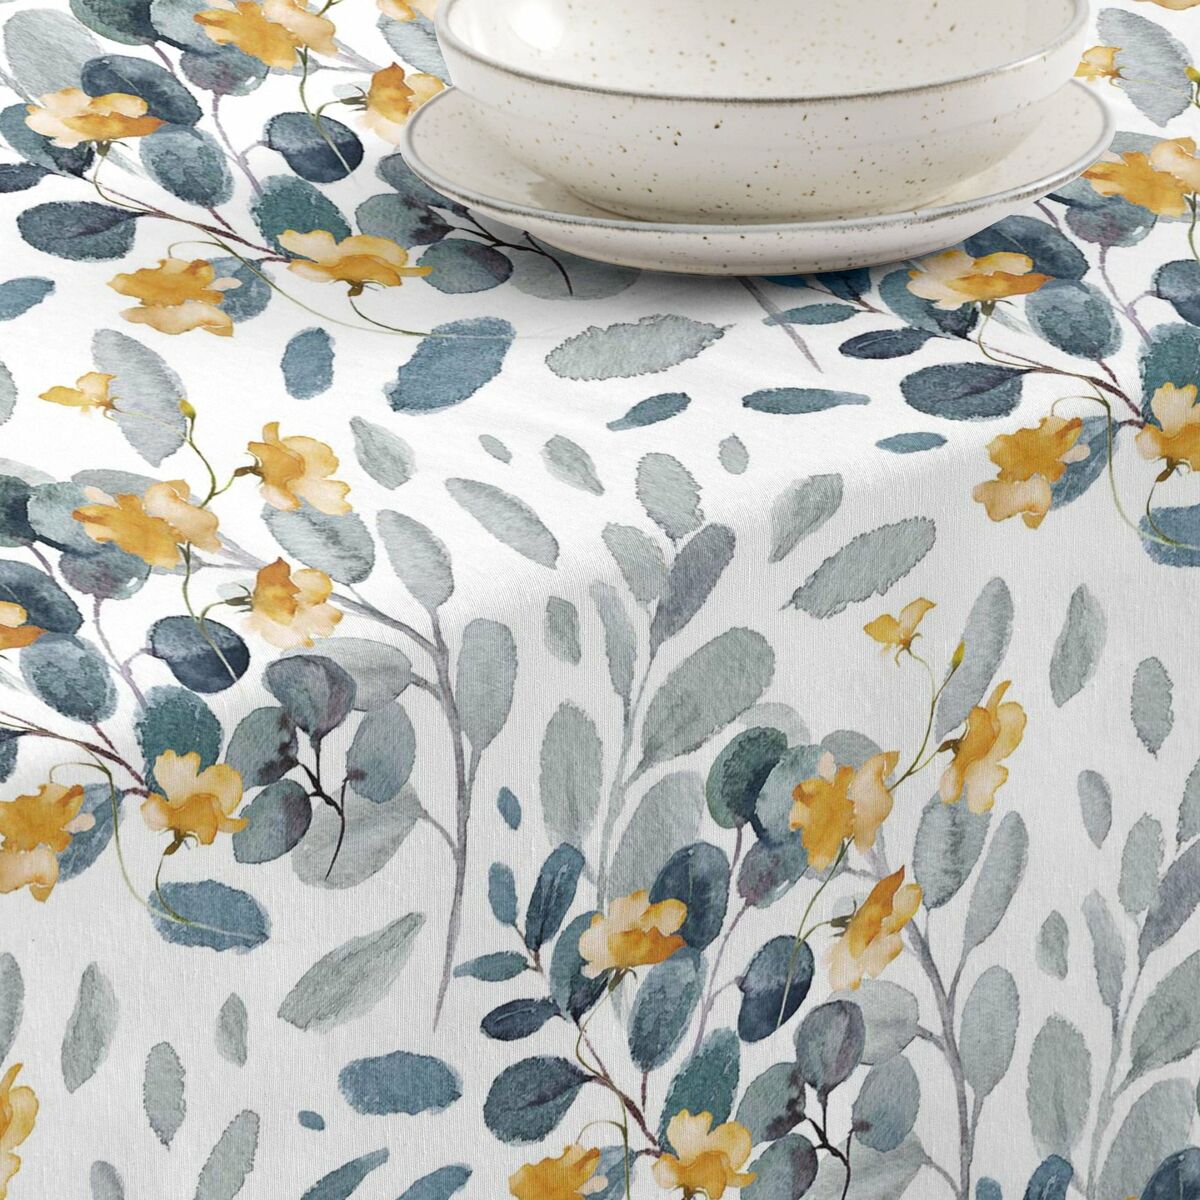 Stain-proof tablecloth Belum 0120-377 100 x 140 cm